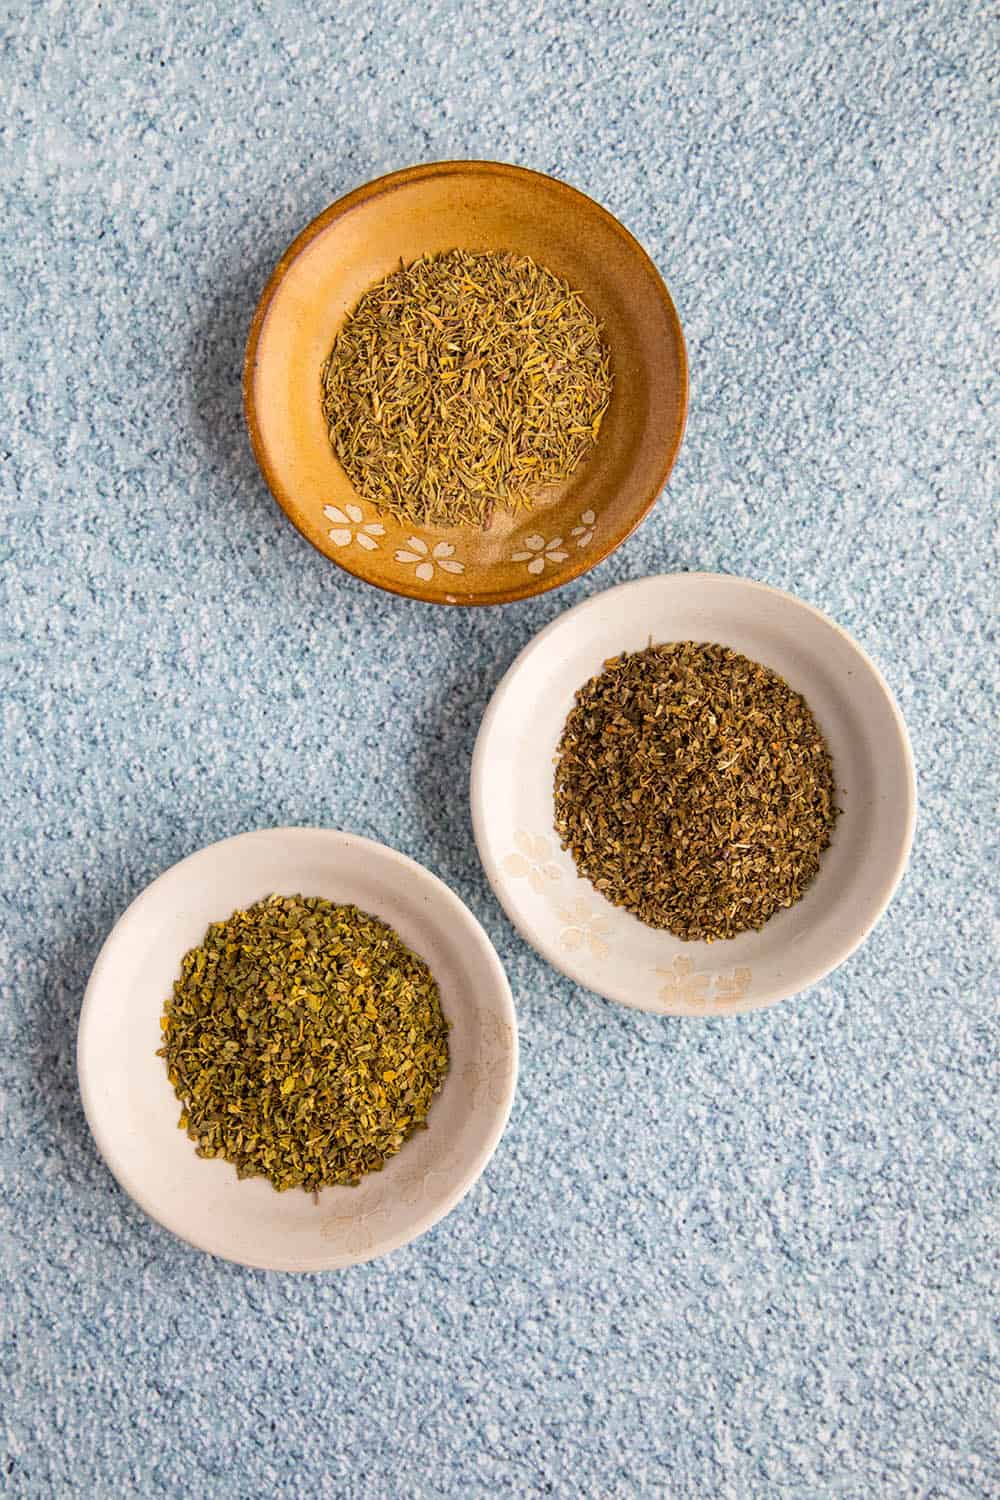 The herbs that go into homemade Creole seasoning